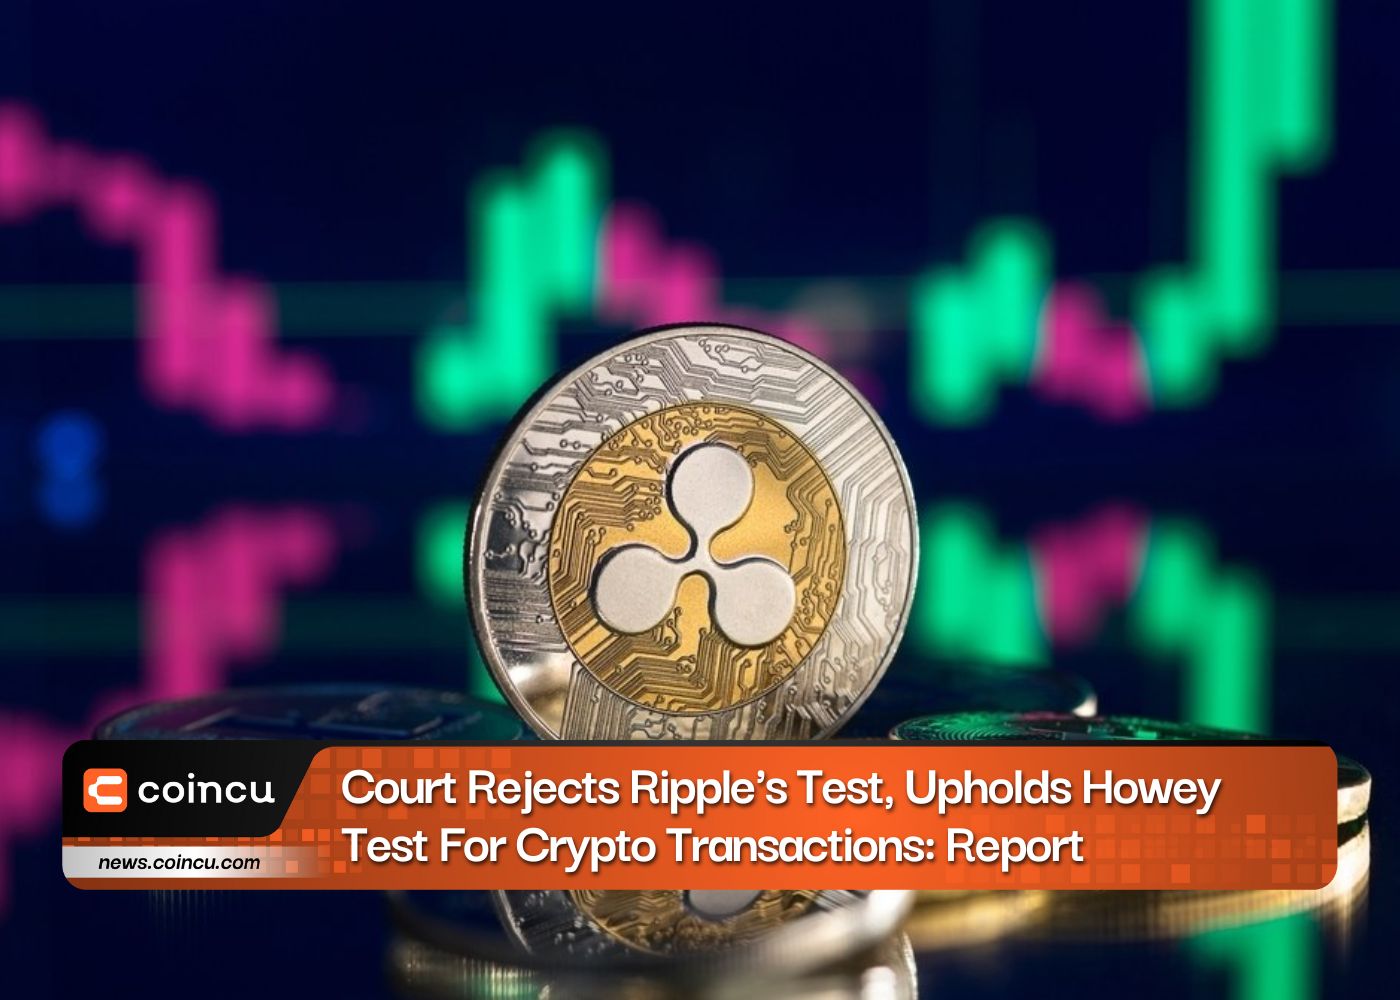 Court Rejects Ripple's Test, Upholds Howey Test For Crypto Transactions: Report